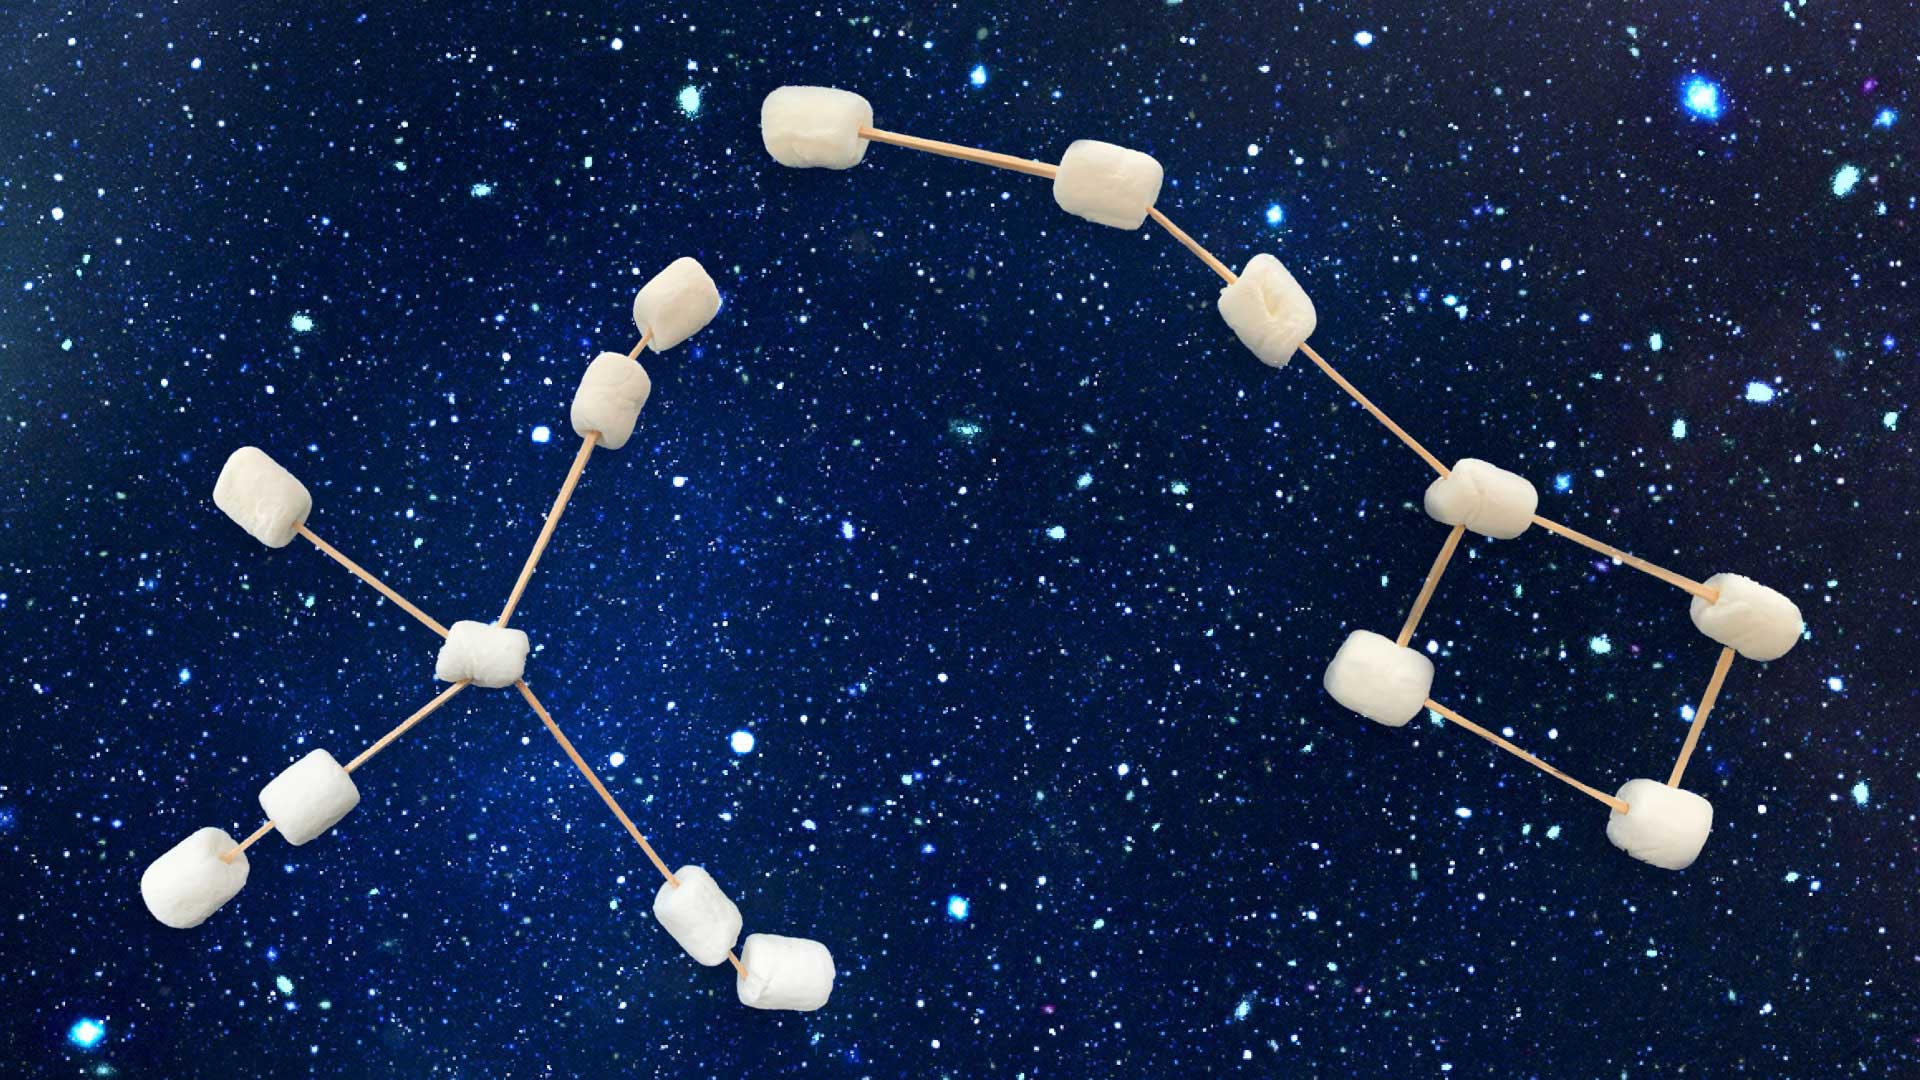 Marshmallows and sticks in the shape of star constellations